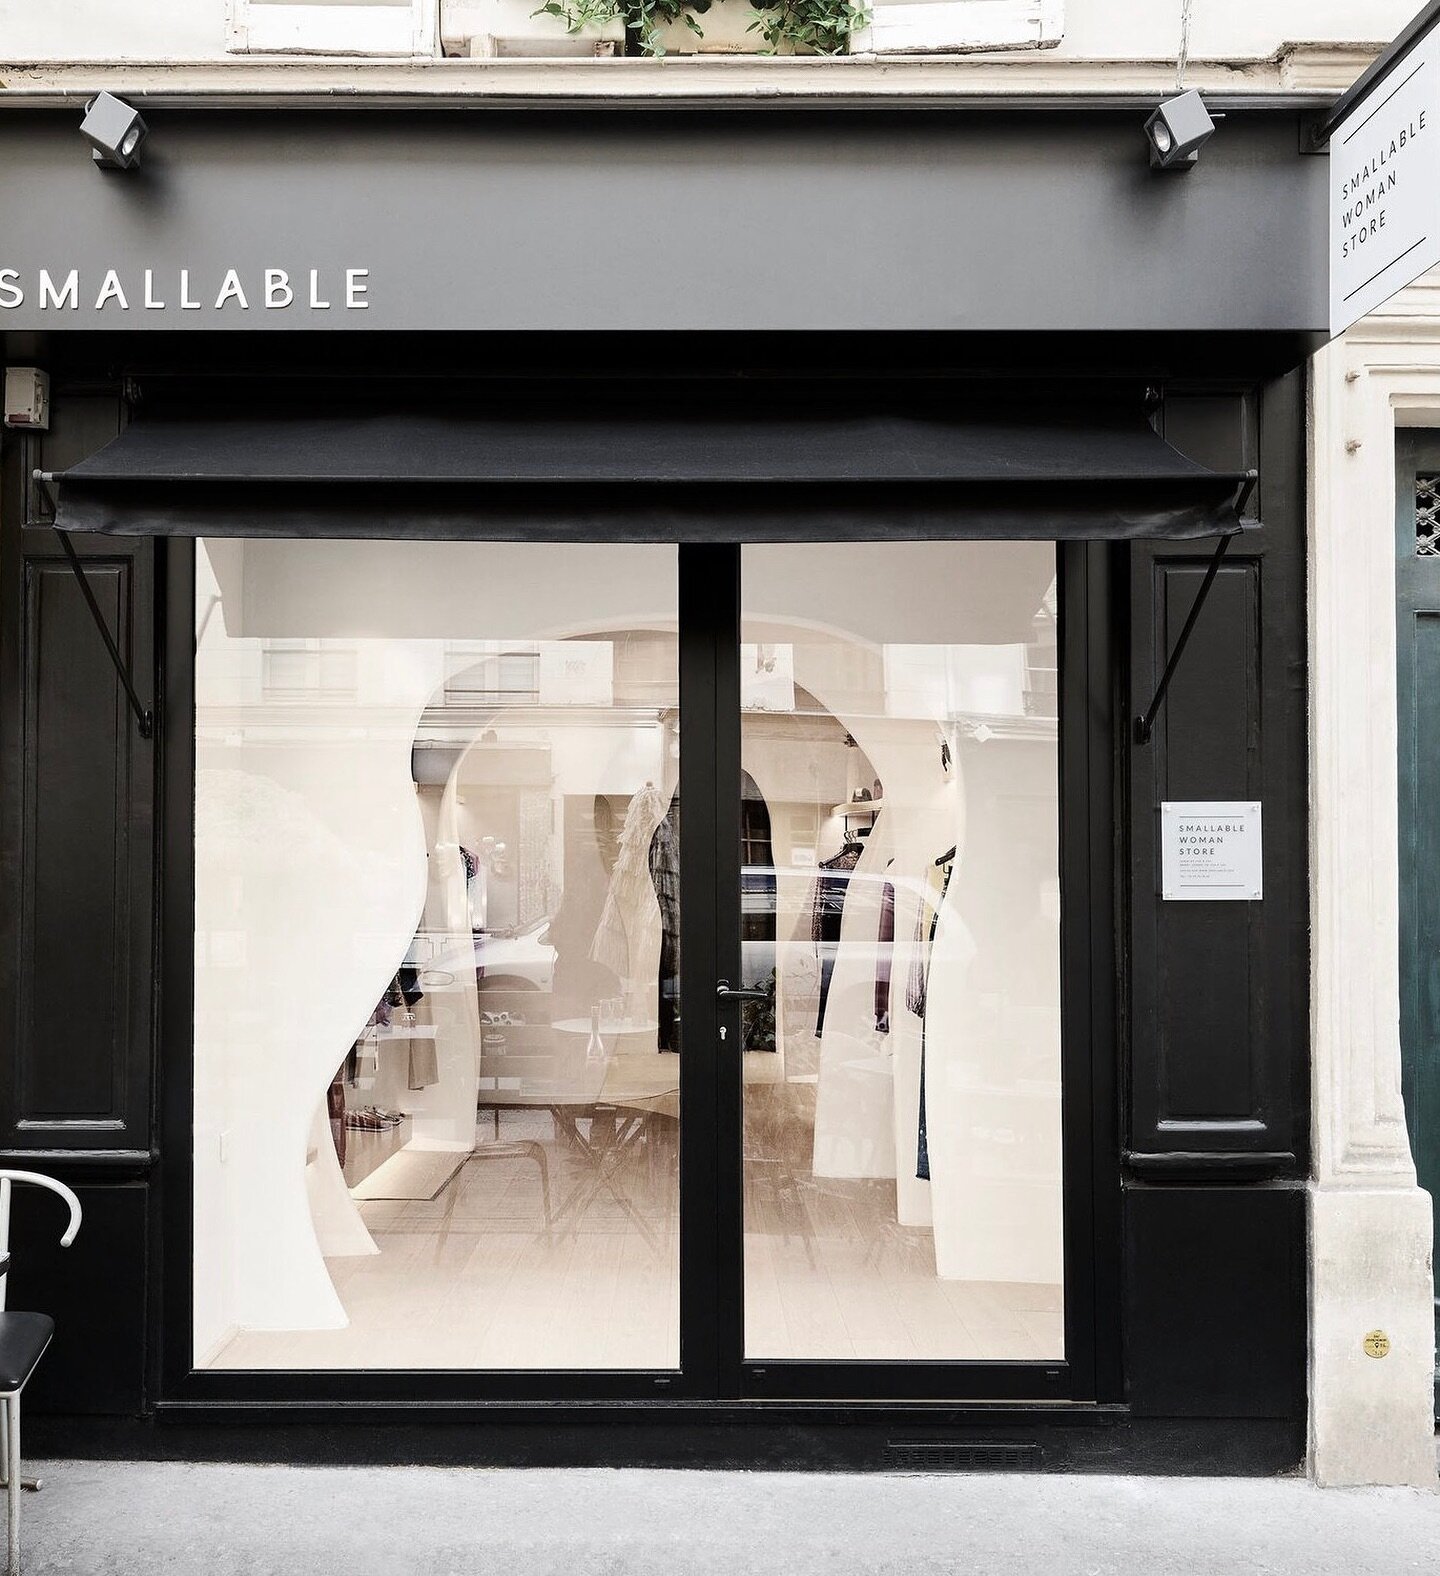 We are trilled to share that AENĒIS is now stocked at SMALLABLE in Paris!
Smallable Woman is a great multybrand store that offers a selection of the finest premium designer brands, located at 82 rue du Cherche-Midi, 75006 Paris.

@smallable_store 
#s